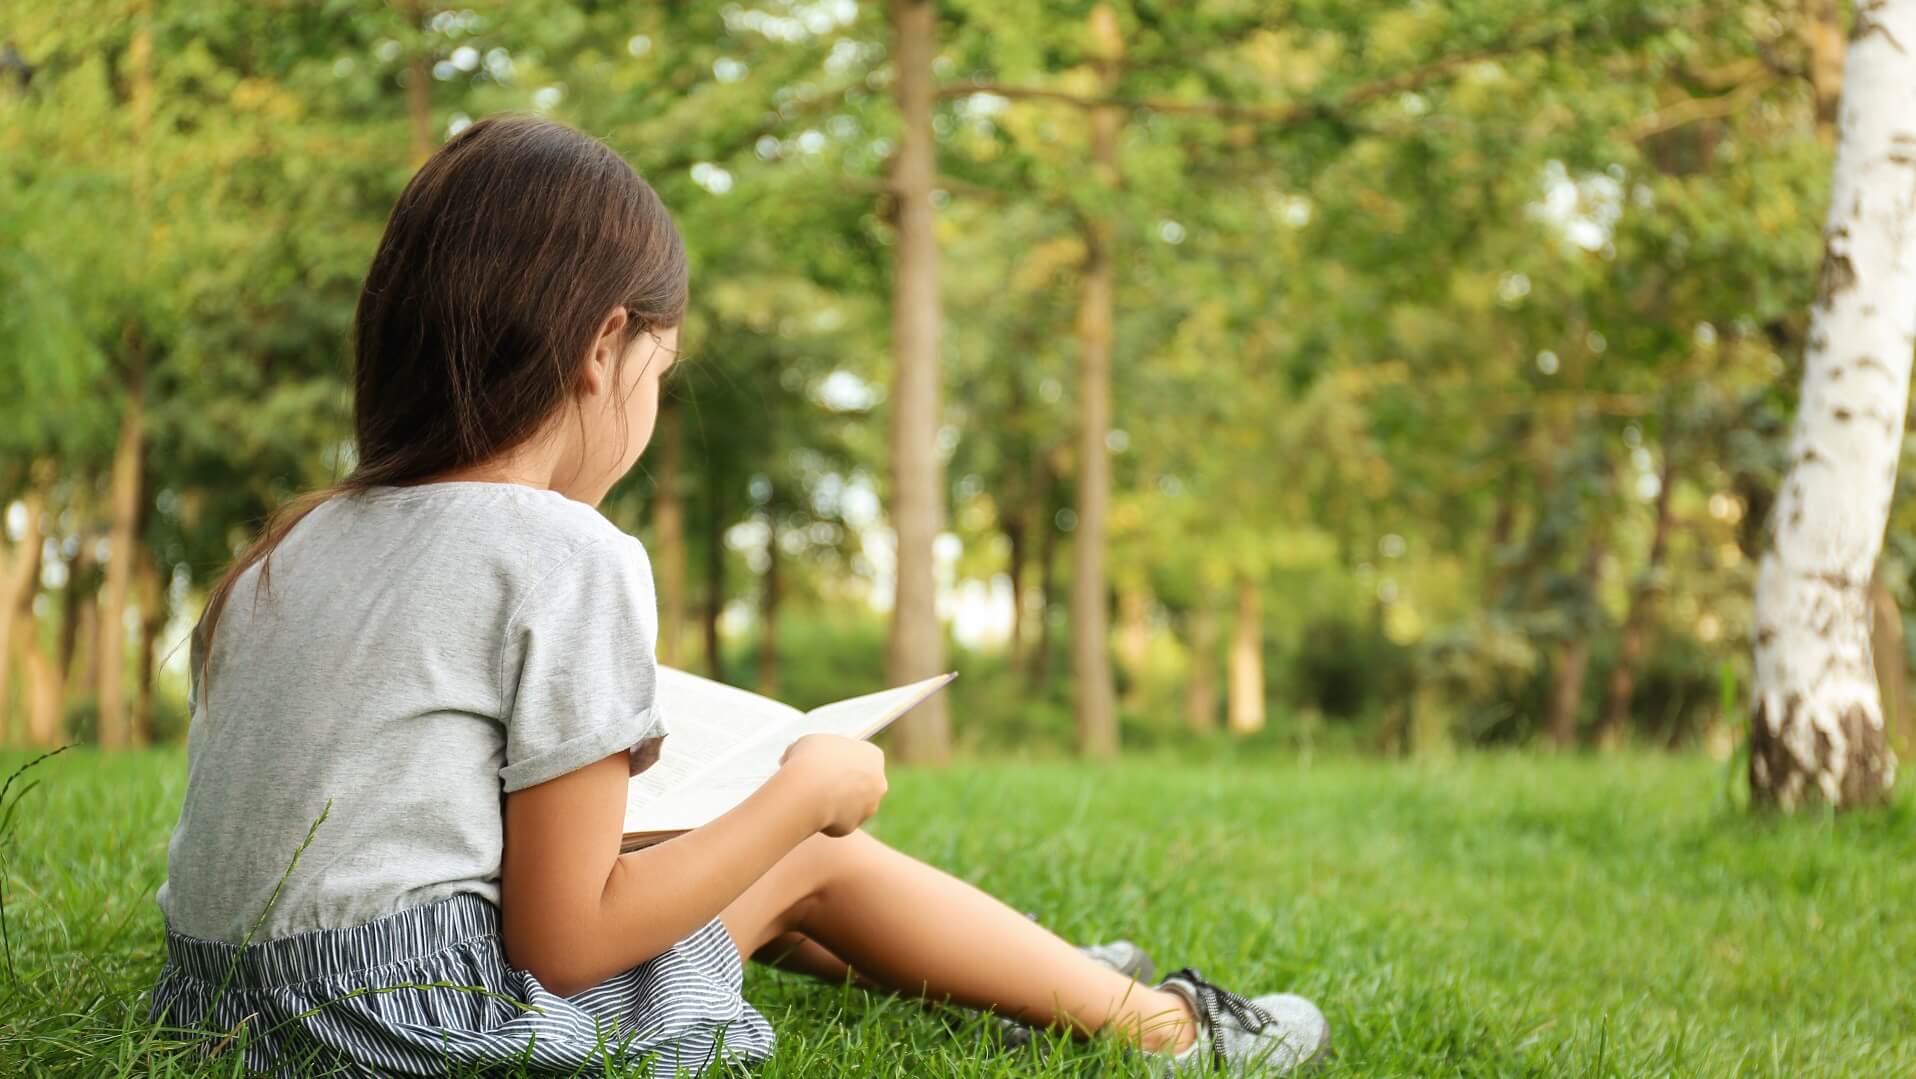 Young girl sitting in a grassy field reading a book